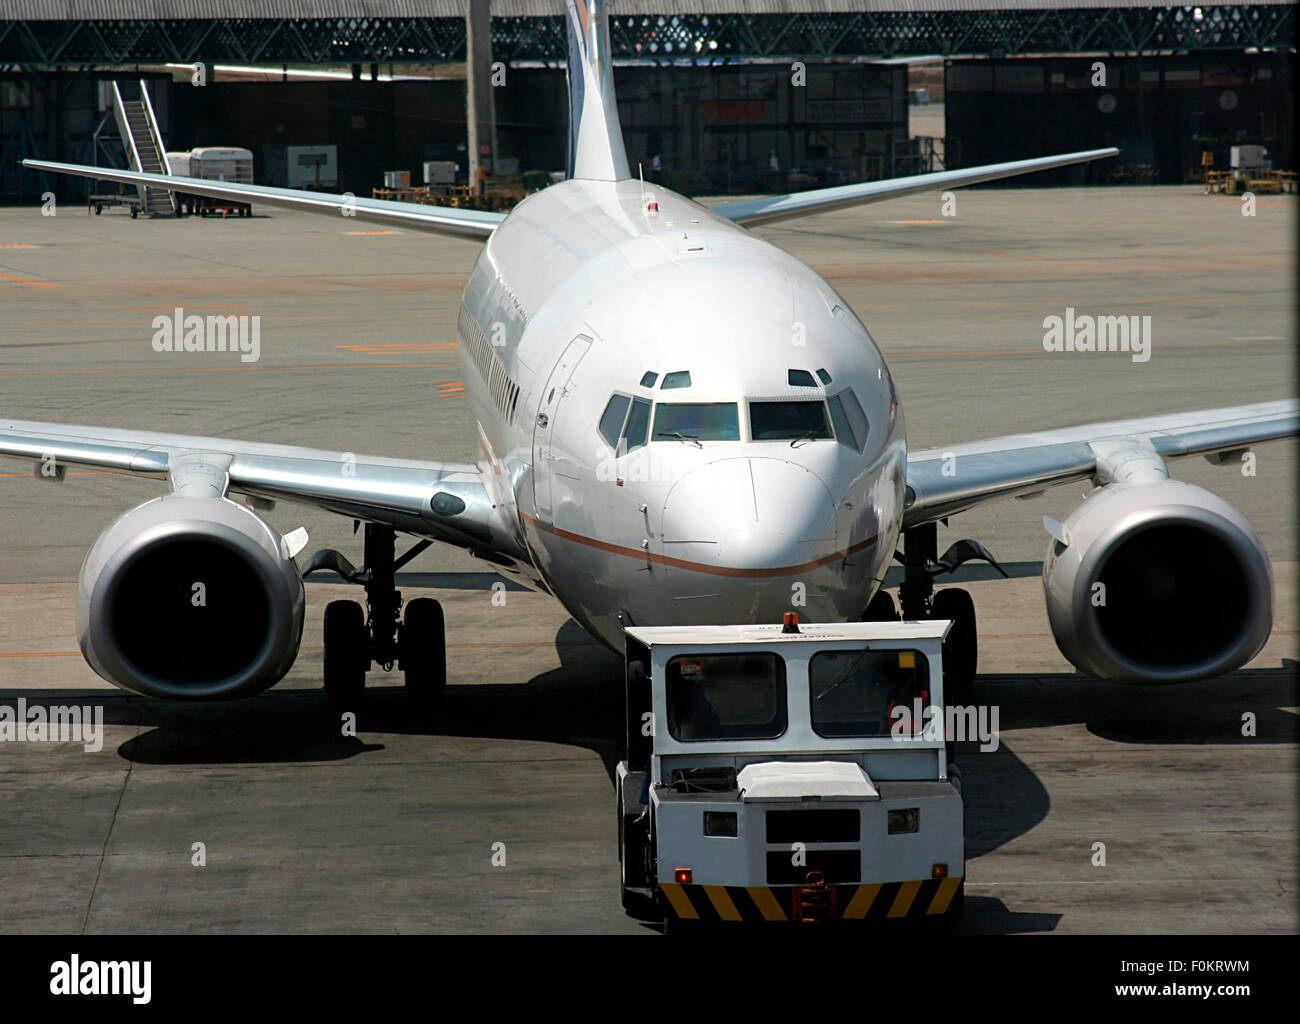 Passenger plane being pulled into the ramp at an airport Stock Photo